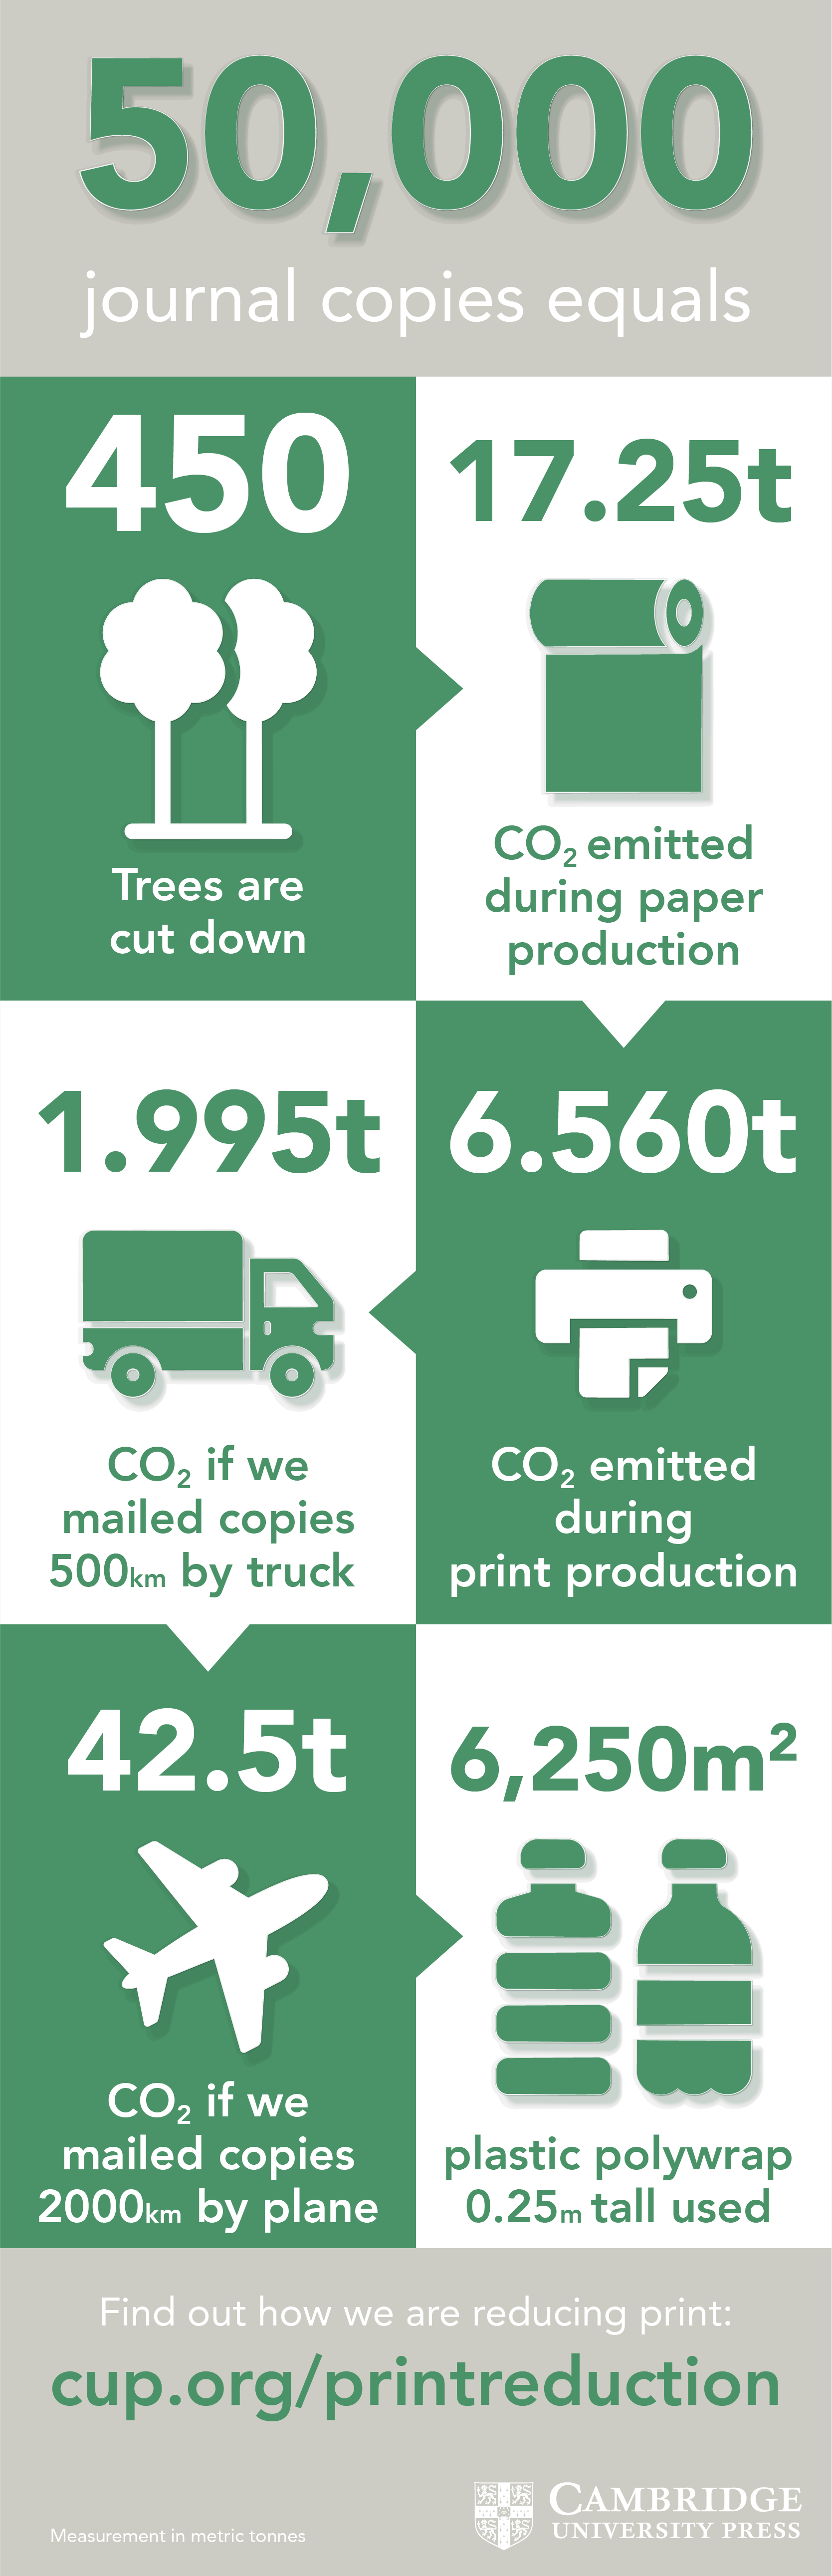 Print Reduction infographic